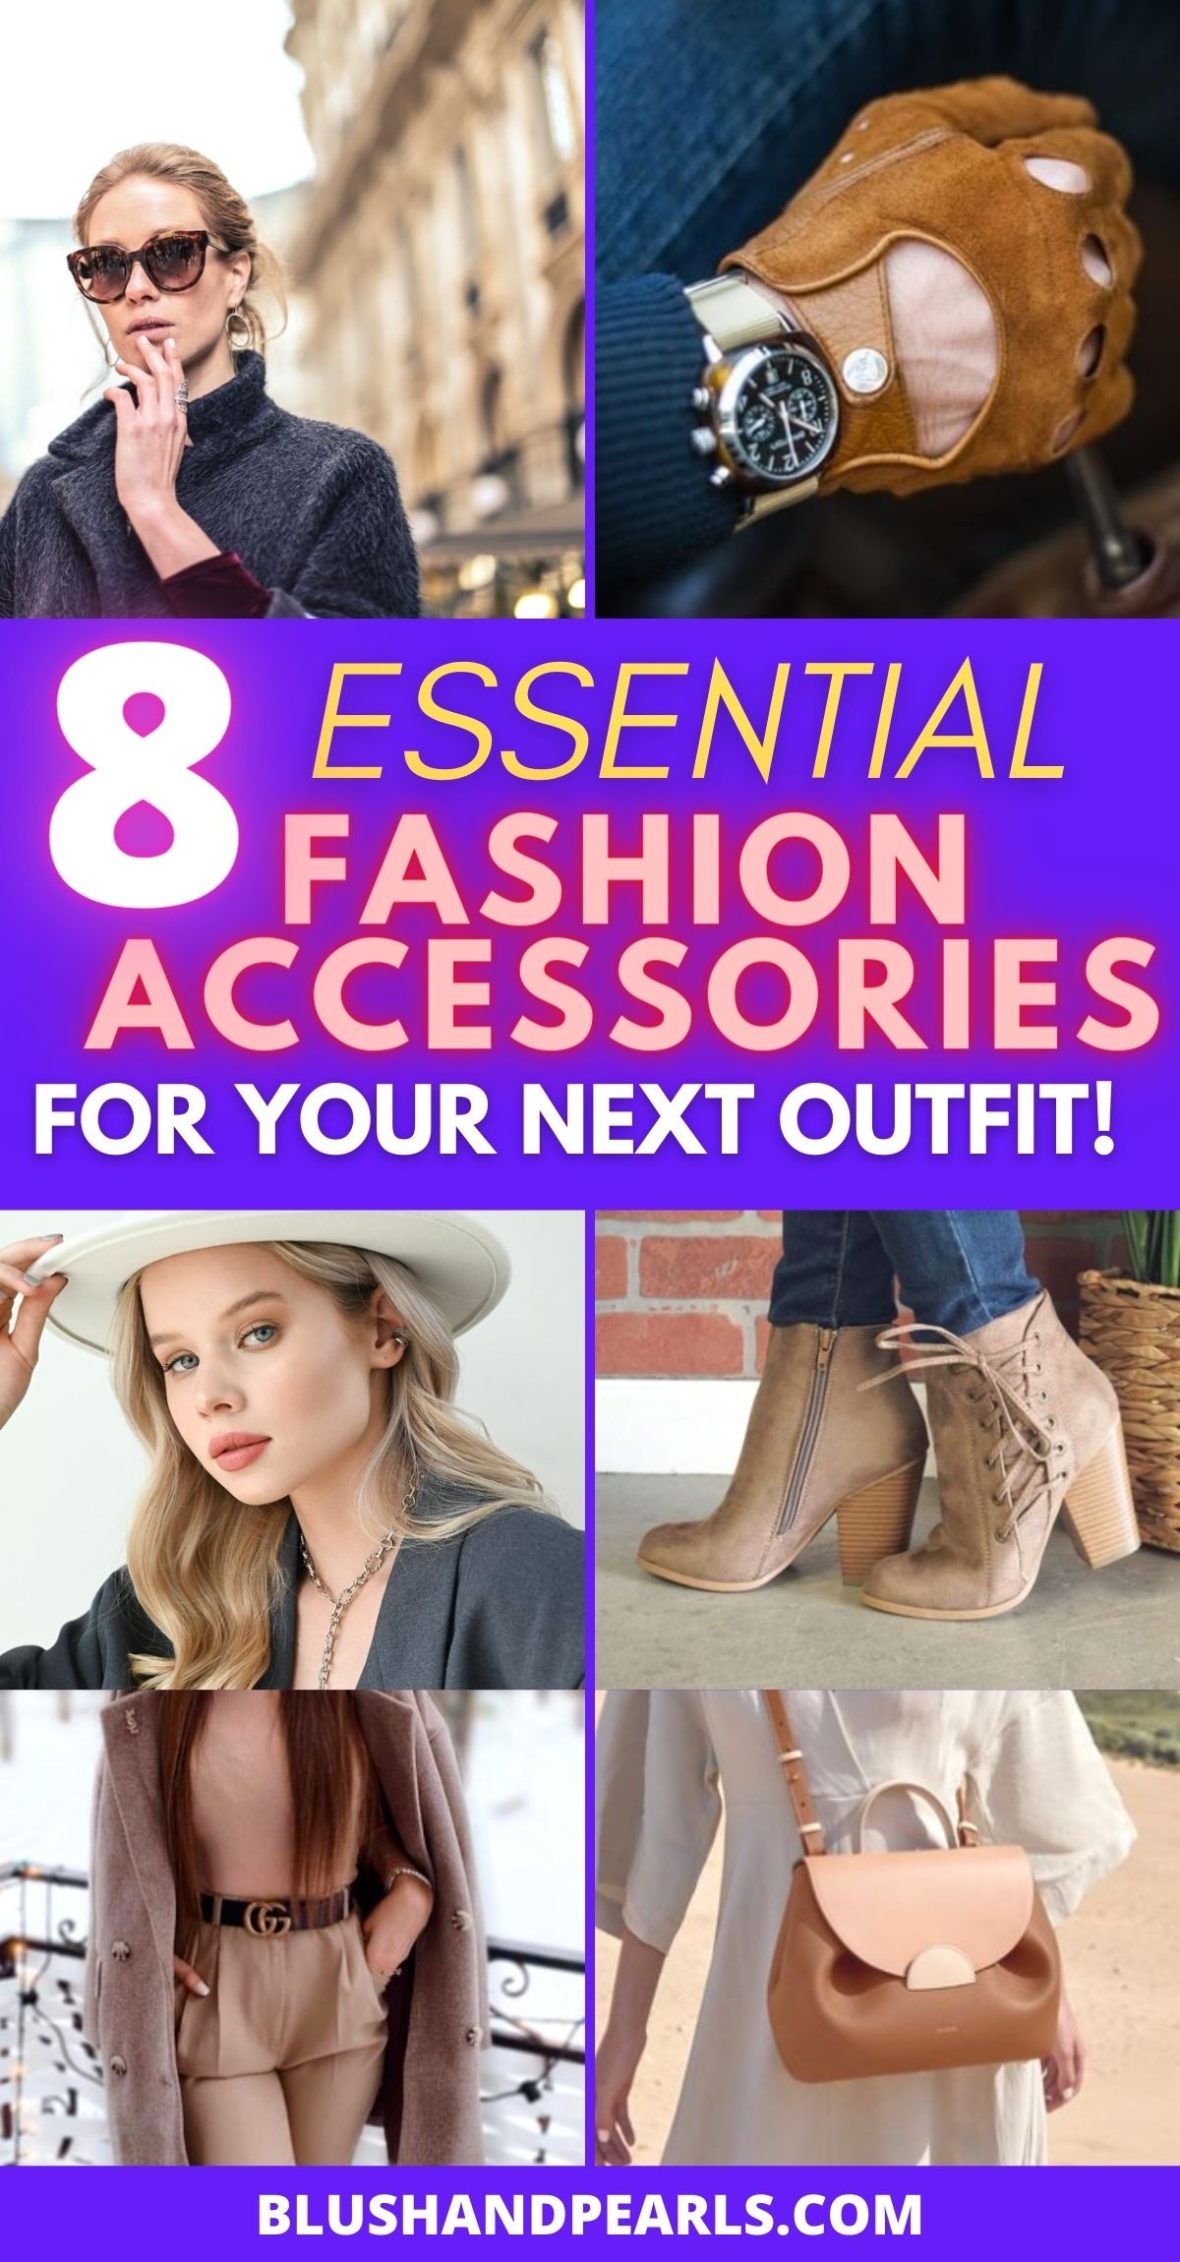 8 Essential Accessories To Make You Look More Fashionable